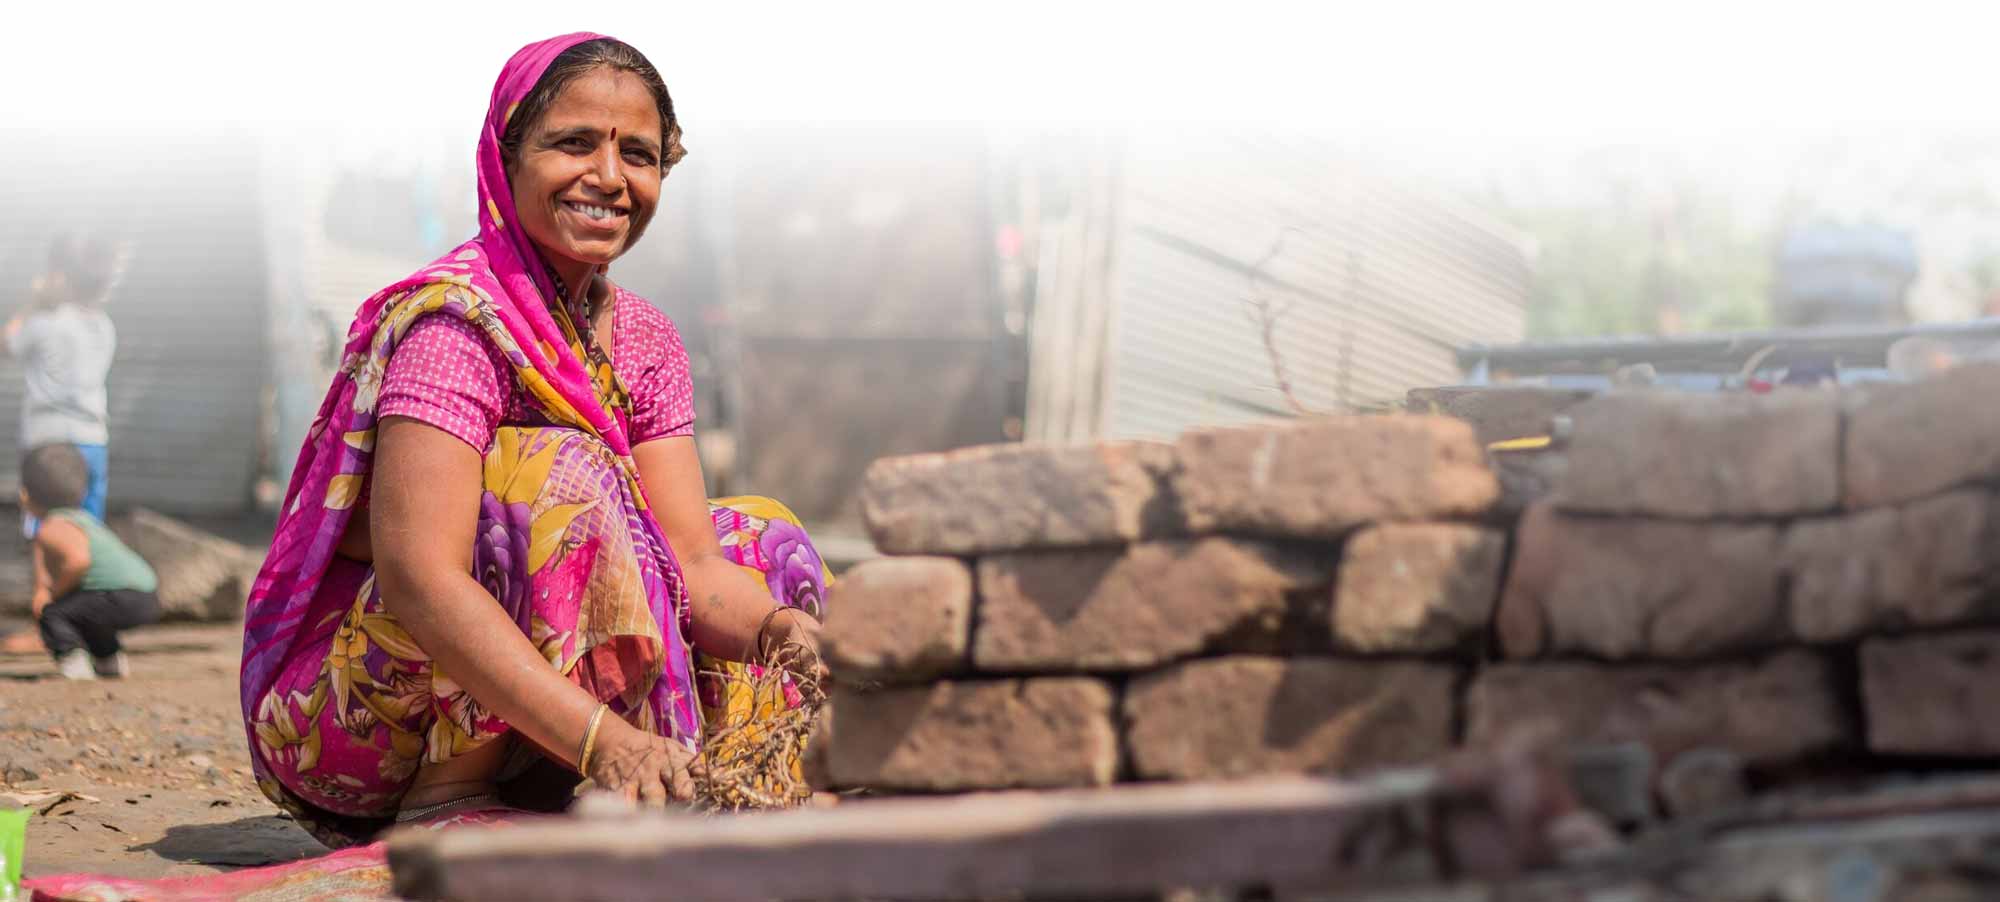 Indian woman crouched down looking joyful and content